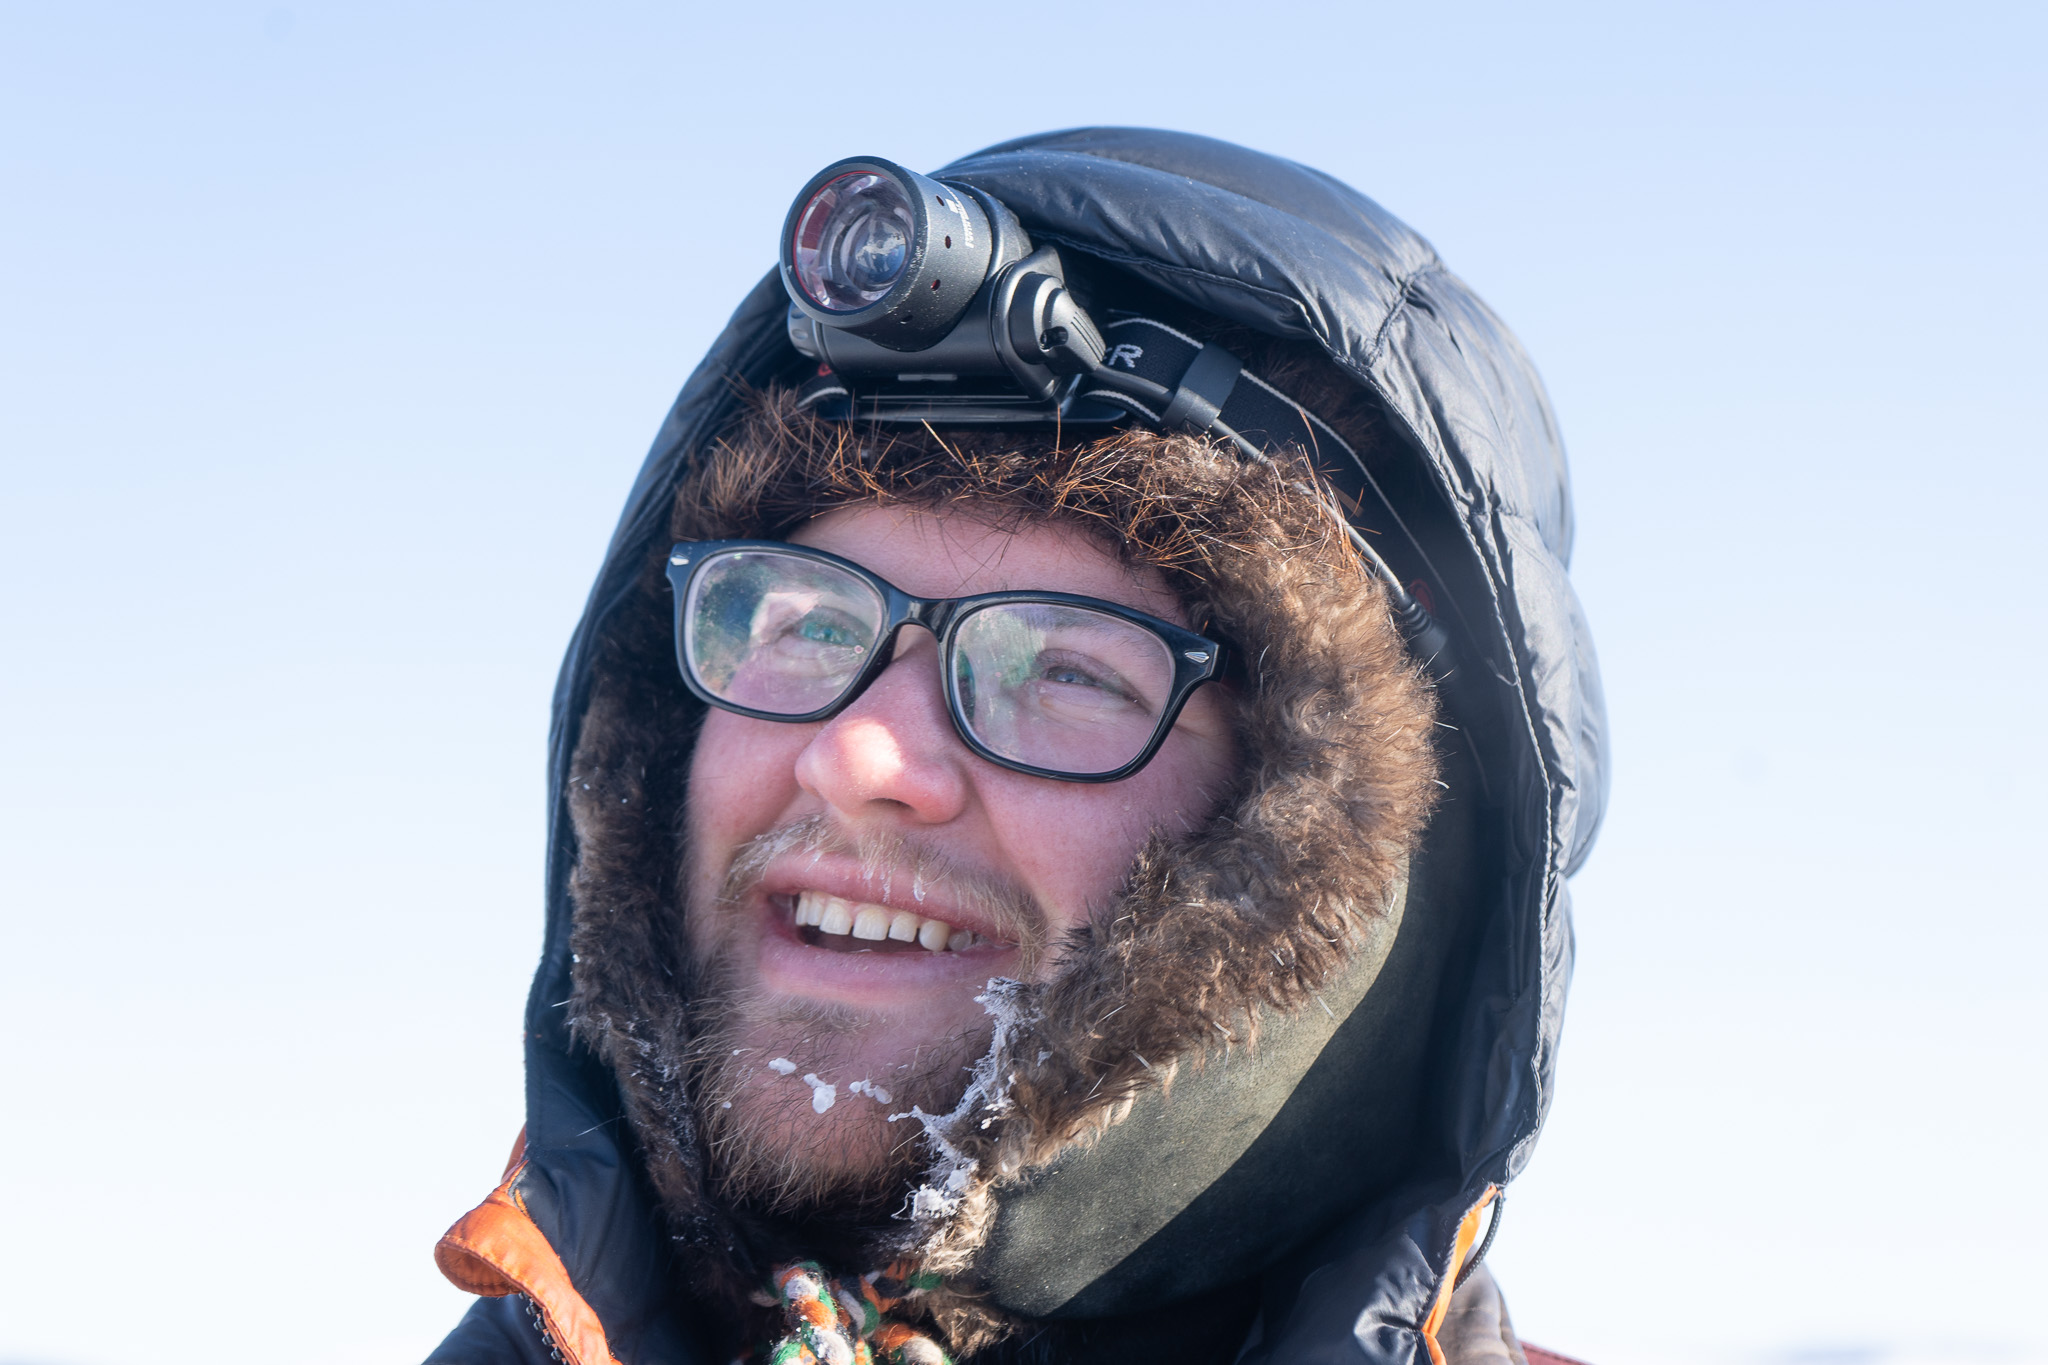 A white man with a small beard and with a headlamp and parka